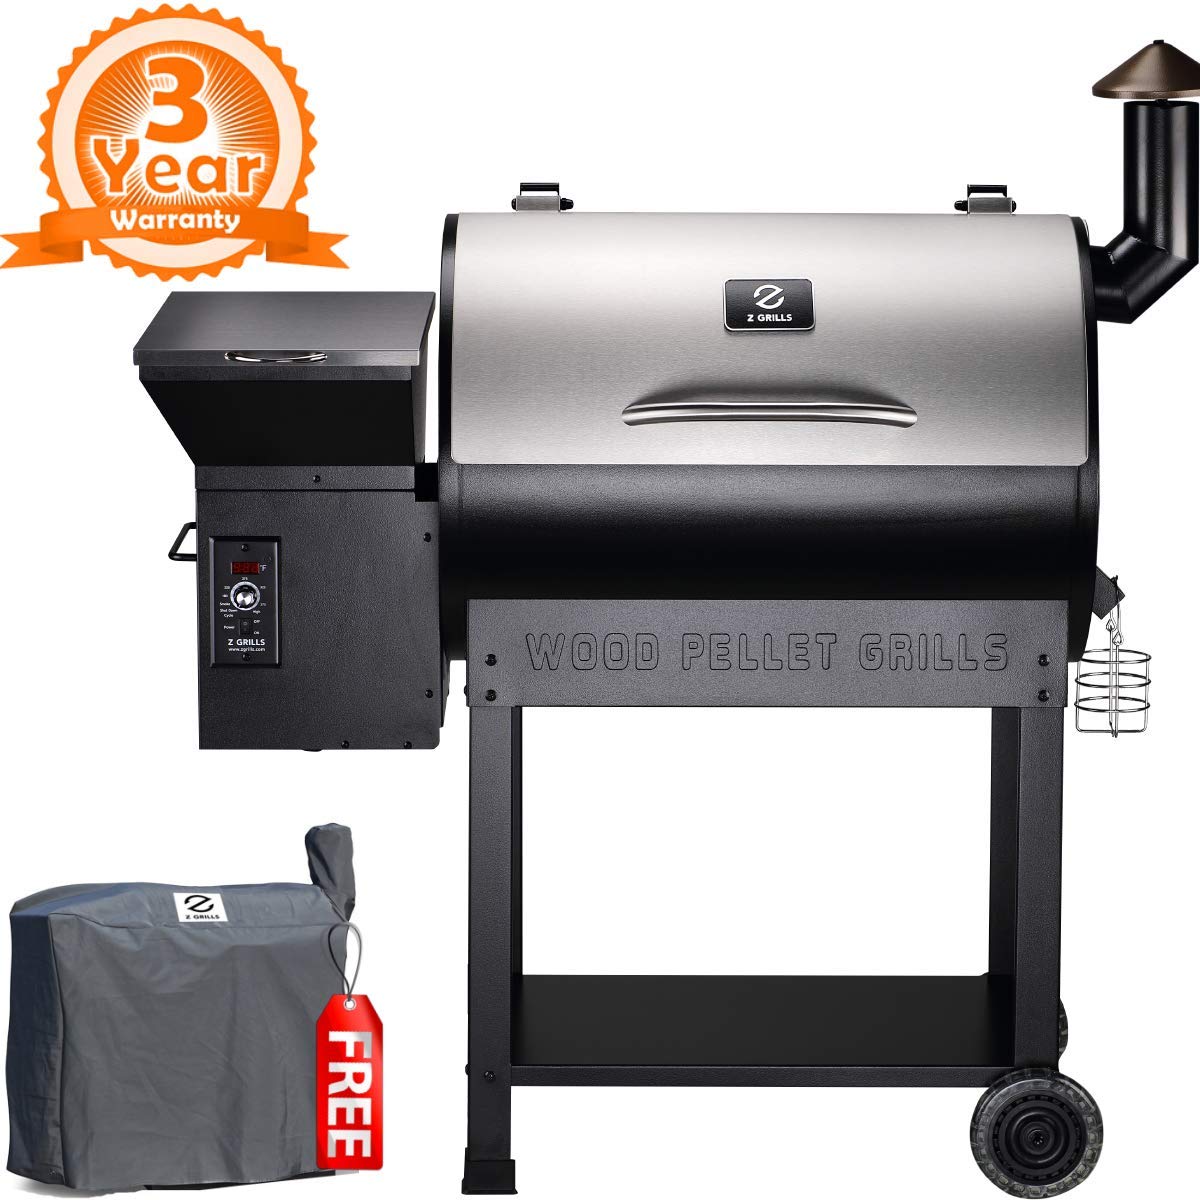 Z GRILLS ZPG-7002E 2019 New Model Wood Pellet Smoker, 8 in 1 BBQ Grill Auto Temperature Control, 700 sq inch Cooking Area, Silver Cover Included - image 1 of 7